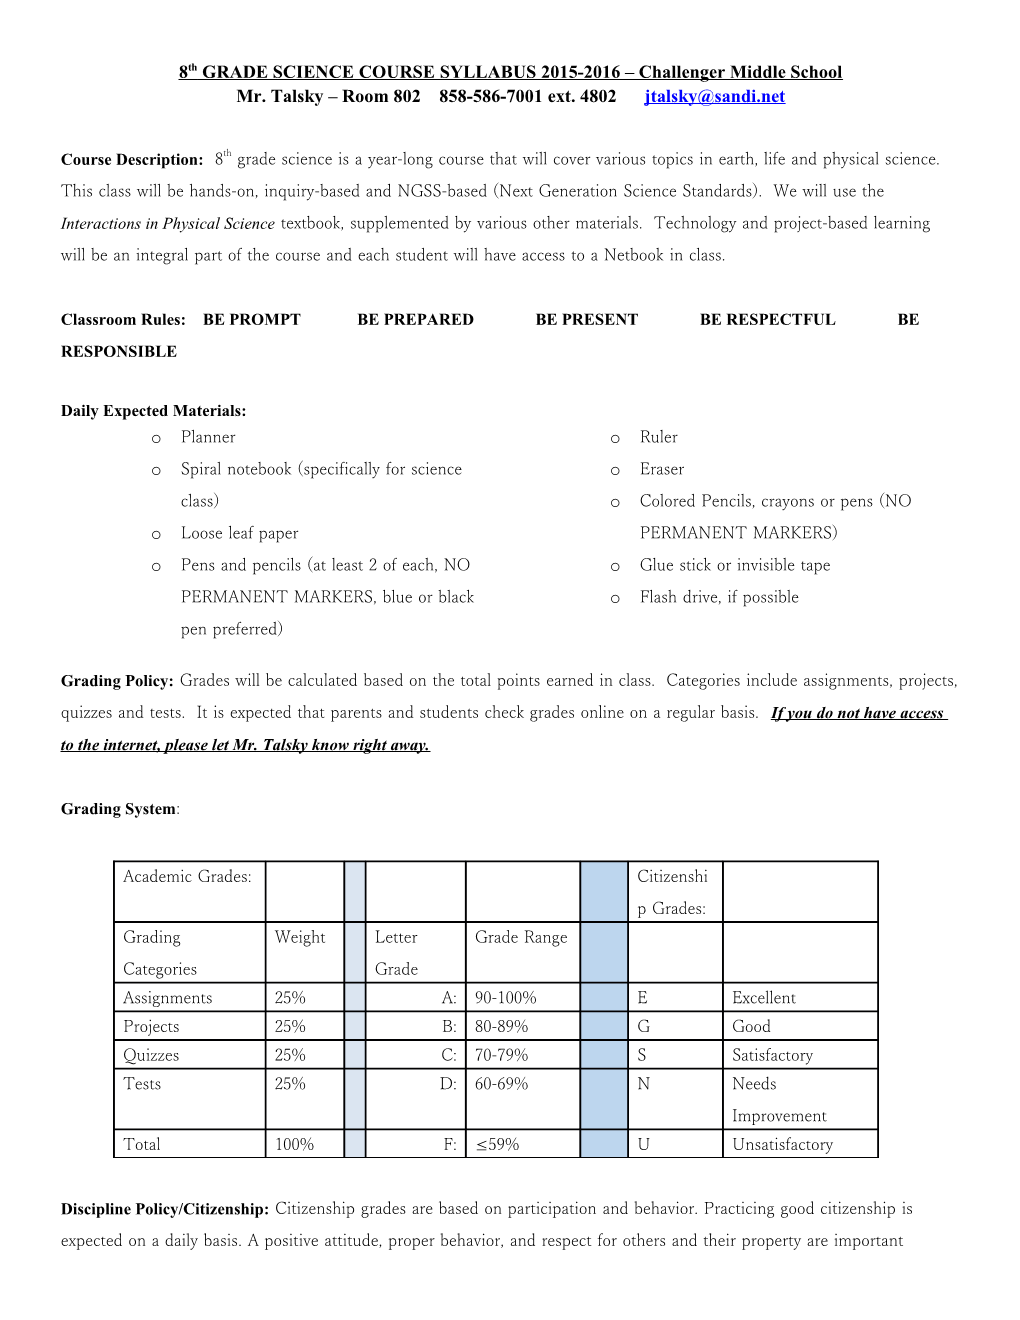 8Th GRADE SCIENCE COURSE SYLLABUS 2015-2016 Challenger Middle School